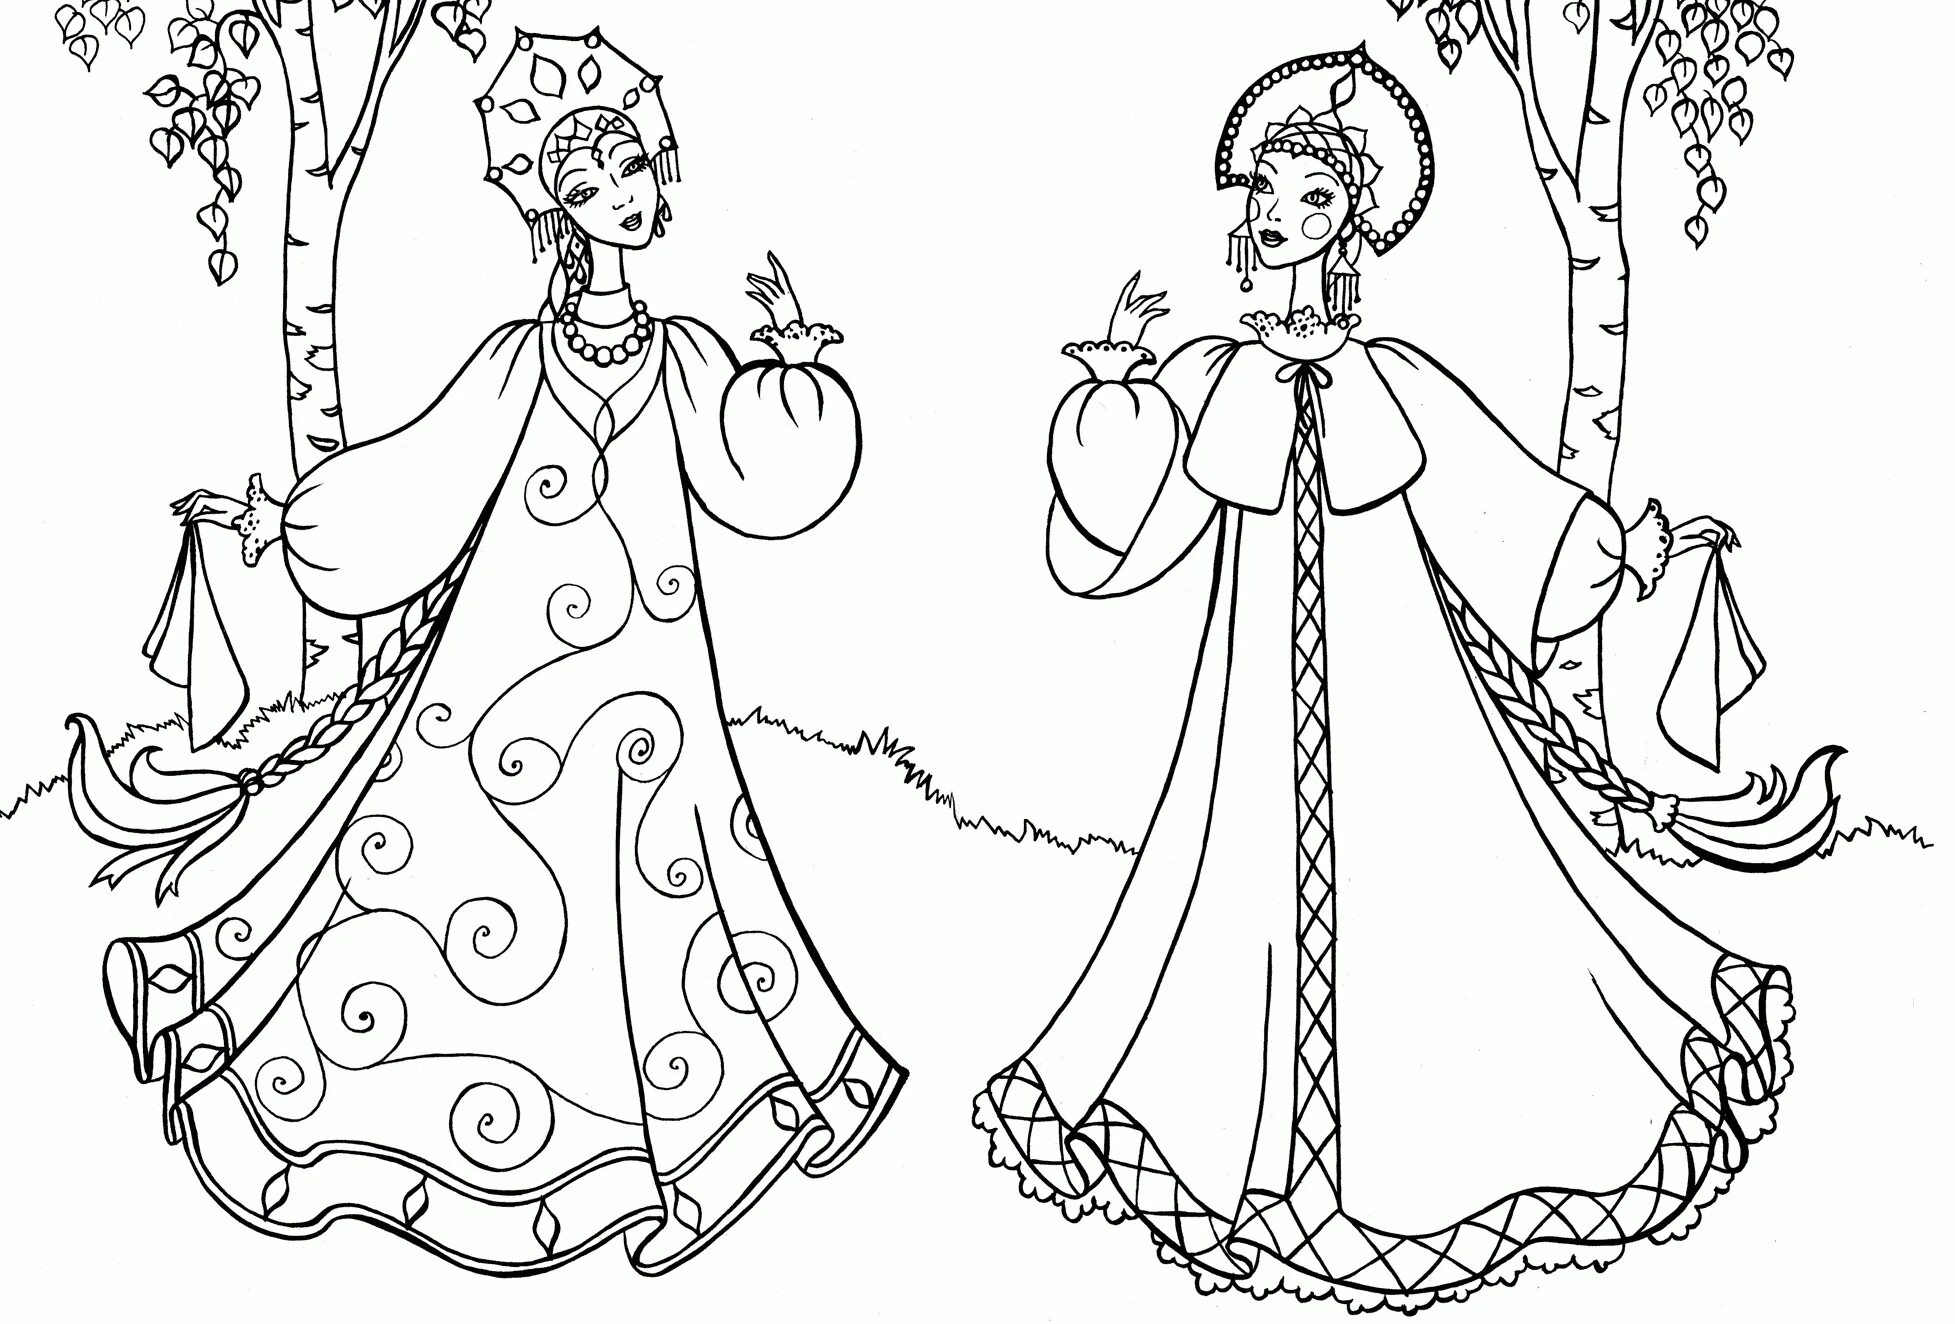 Violent Russian costume coloring book for kids